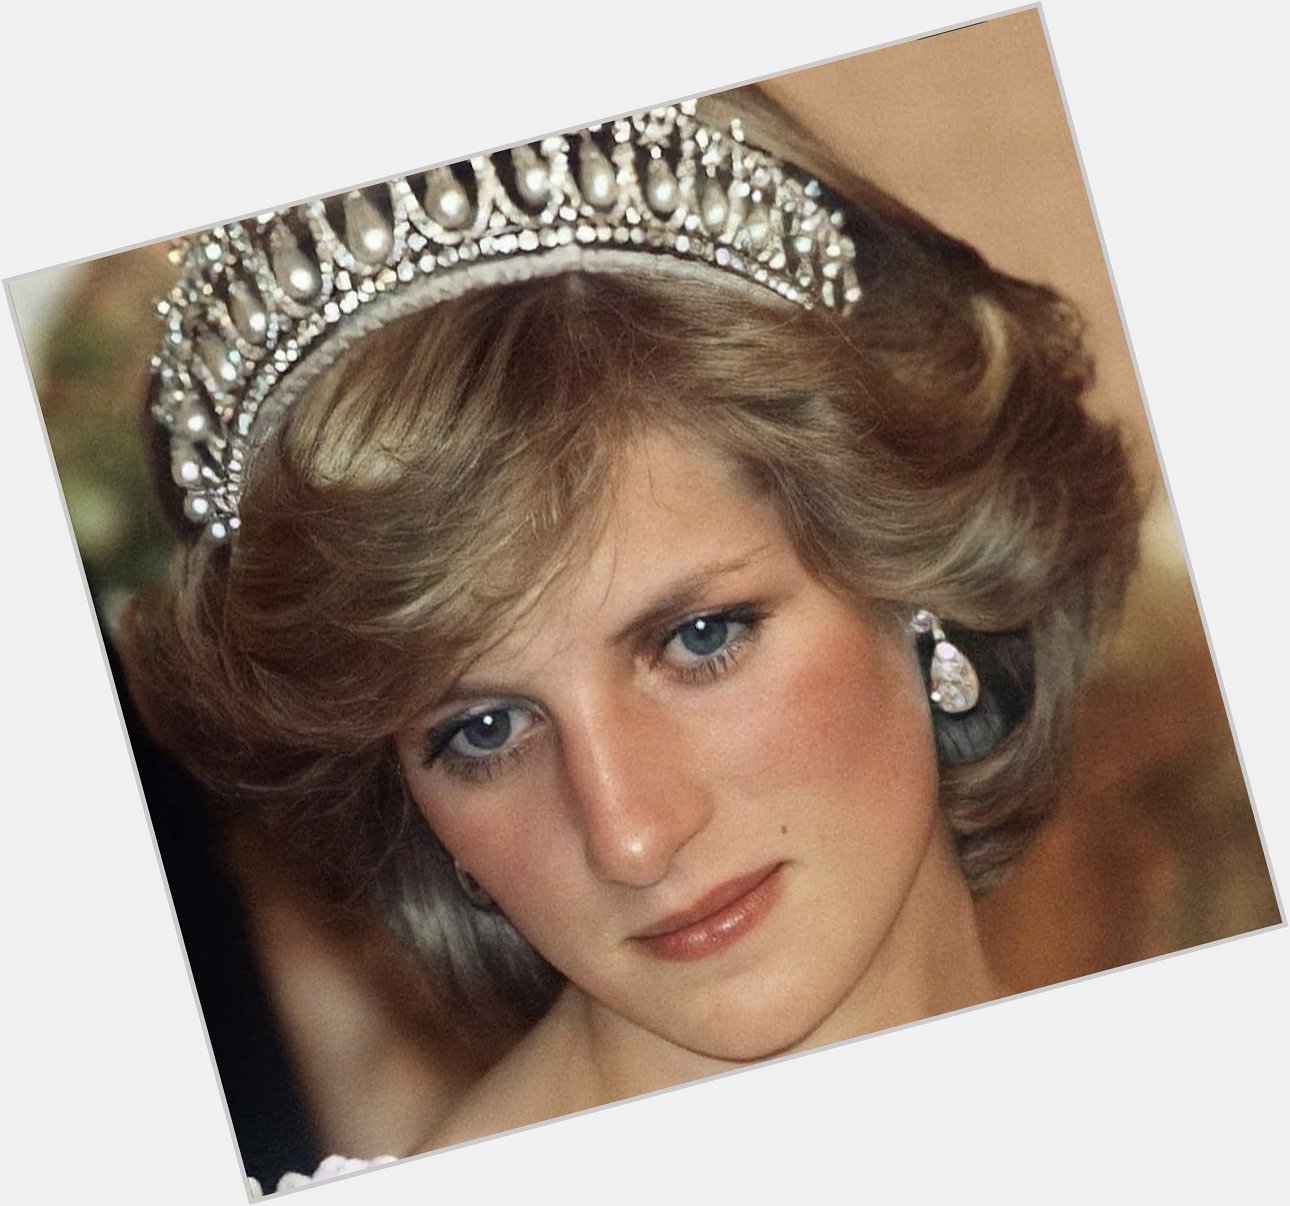 Princess Diana would of been 60 today
Happy heavenly birthday    